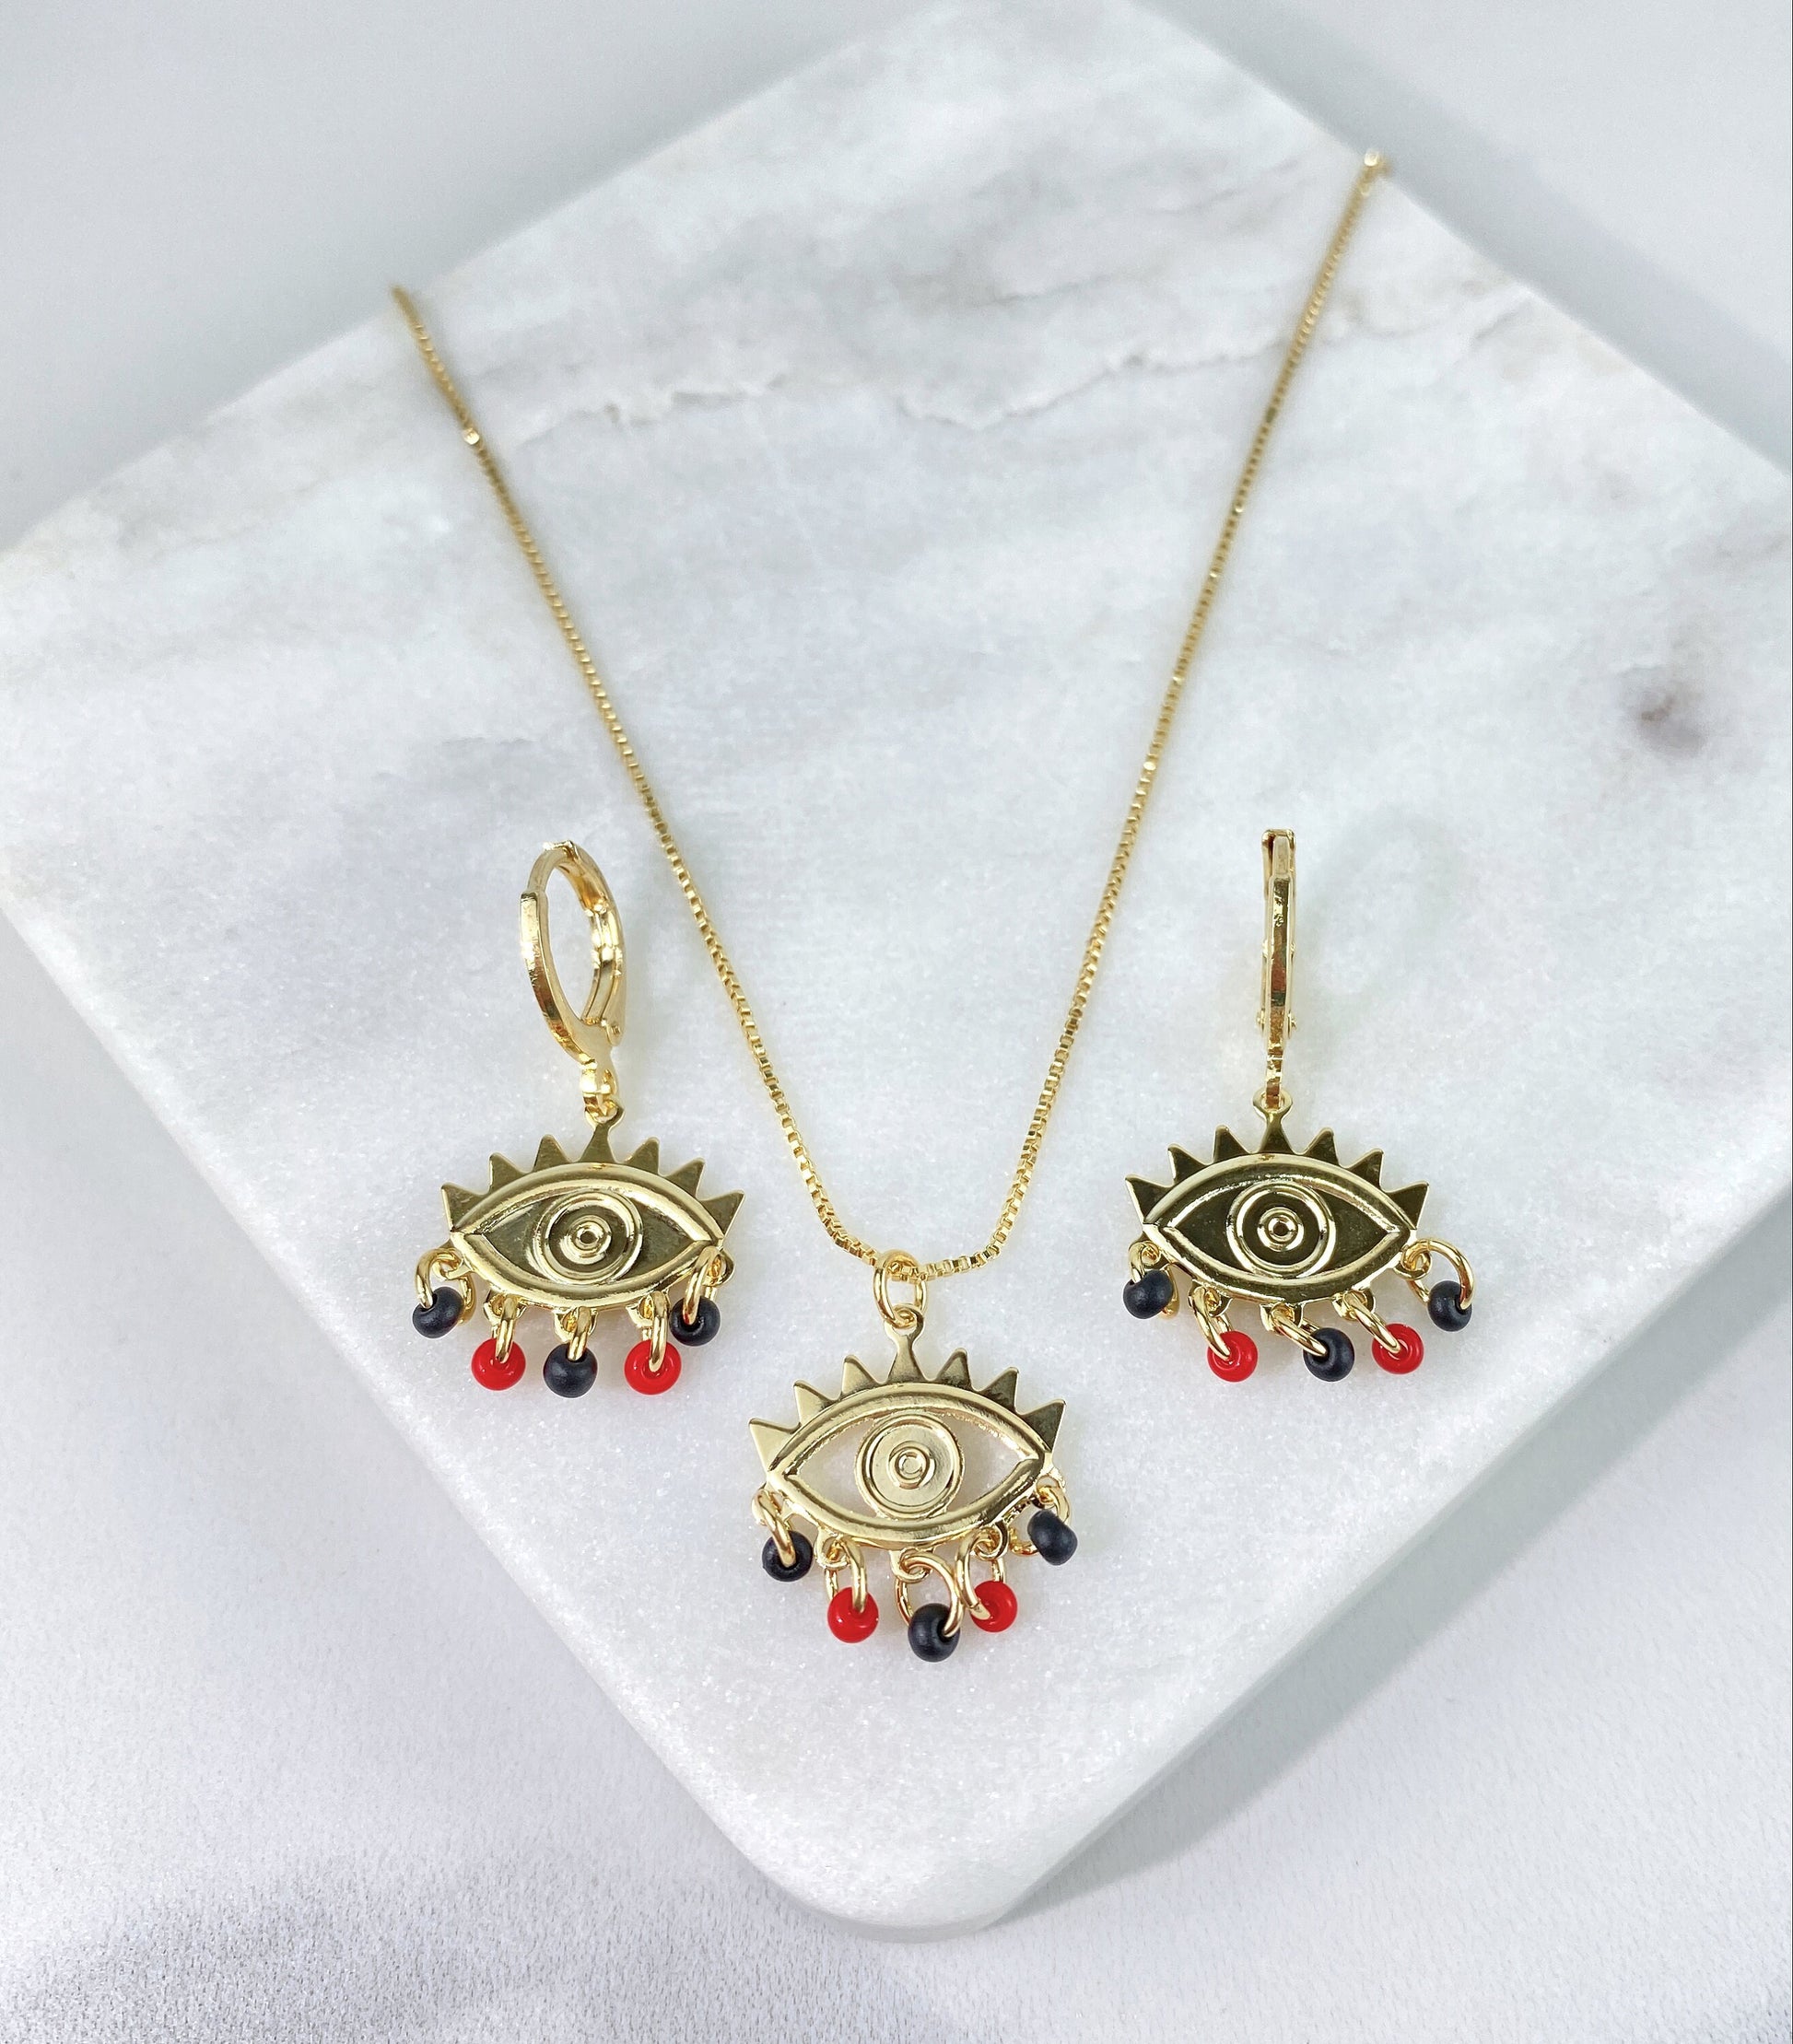 18k Gold Filled 1mm Box Chain, Red and Black Beads, Azabache Style, Evil Eyes Necklace & Earrings Set, Wholesale Jewelry Supplies